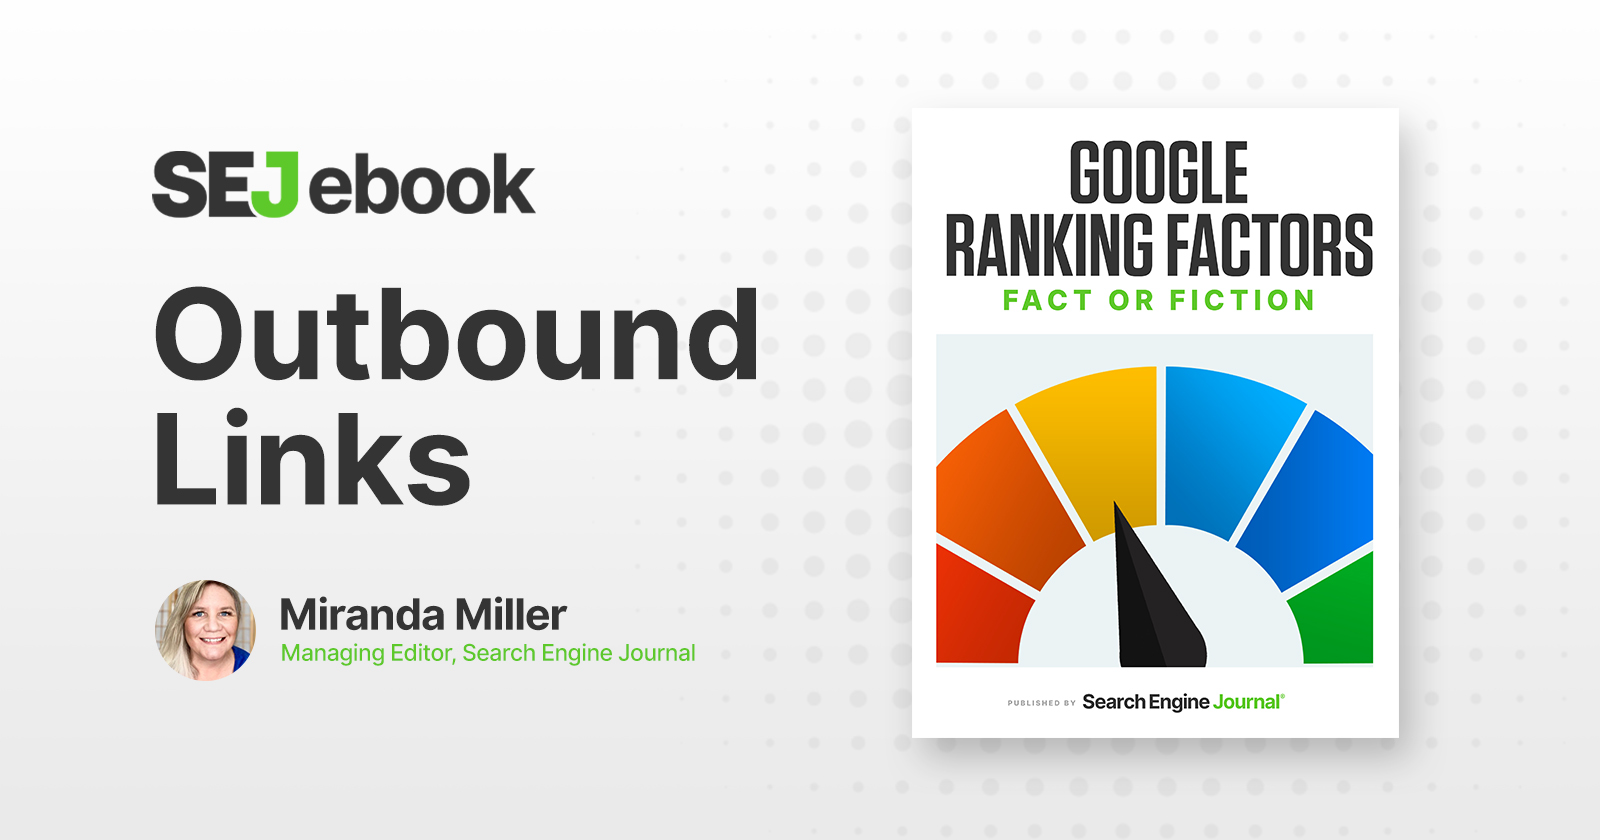 Are Outbound Links A Google Search Ranking Factor? via @sejournal, @mirandalmwrites